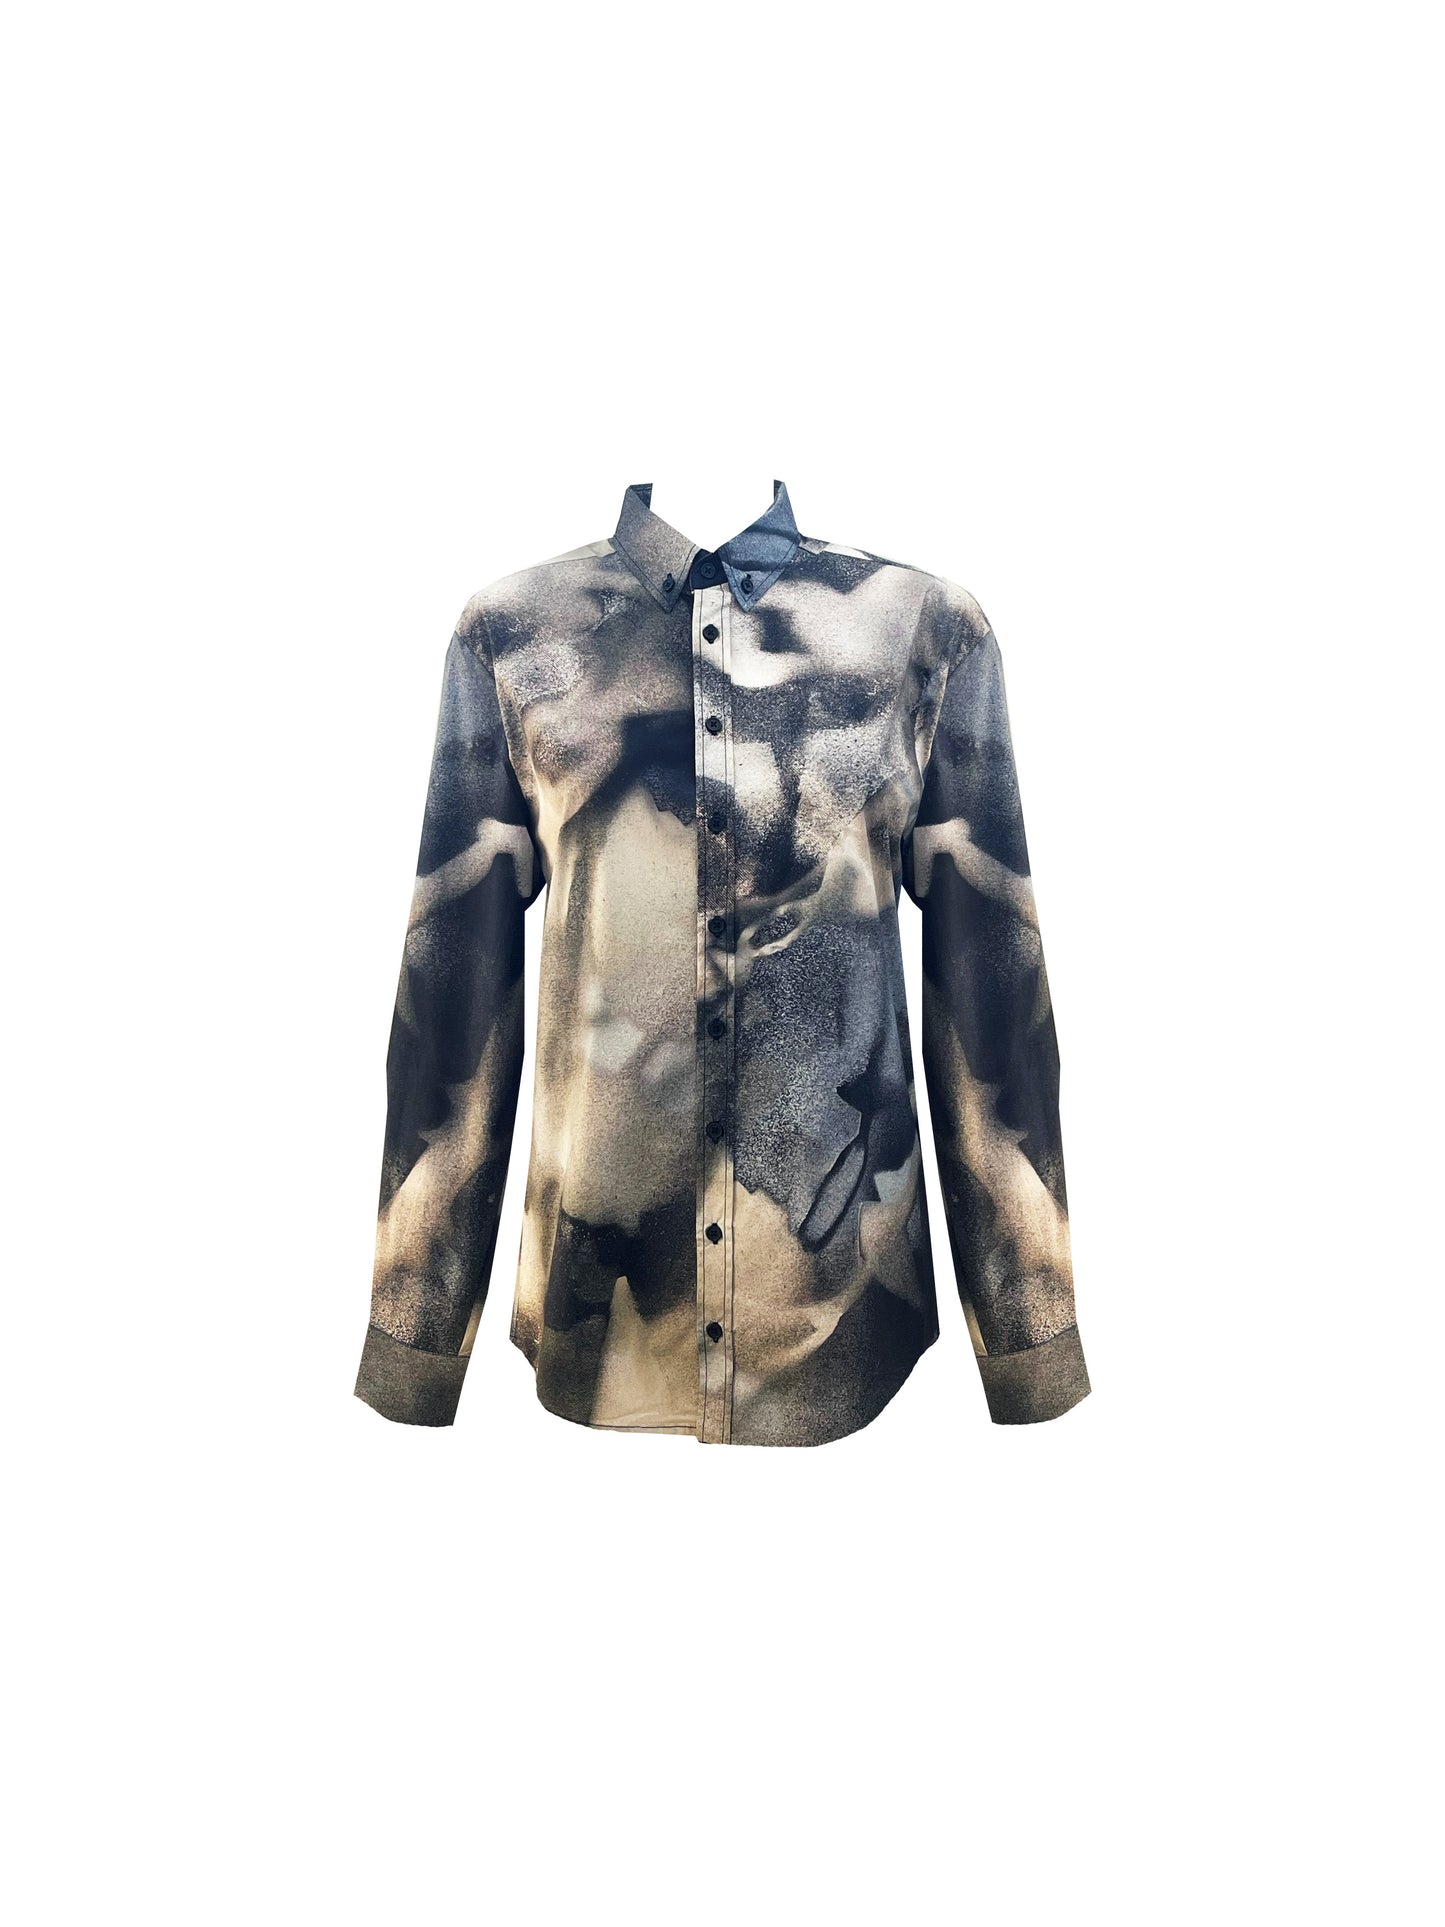 The Boyfriend Shirt in Airbrushed Spikes